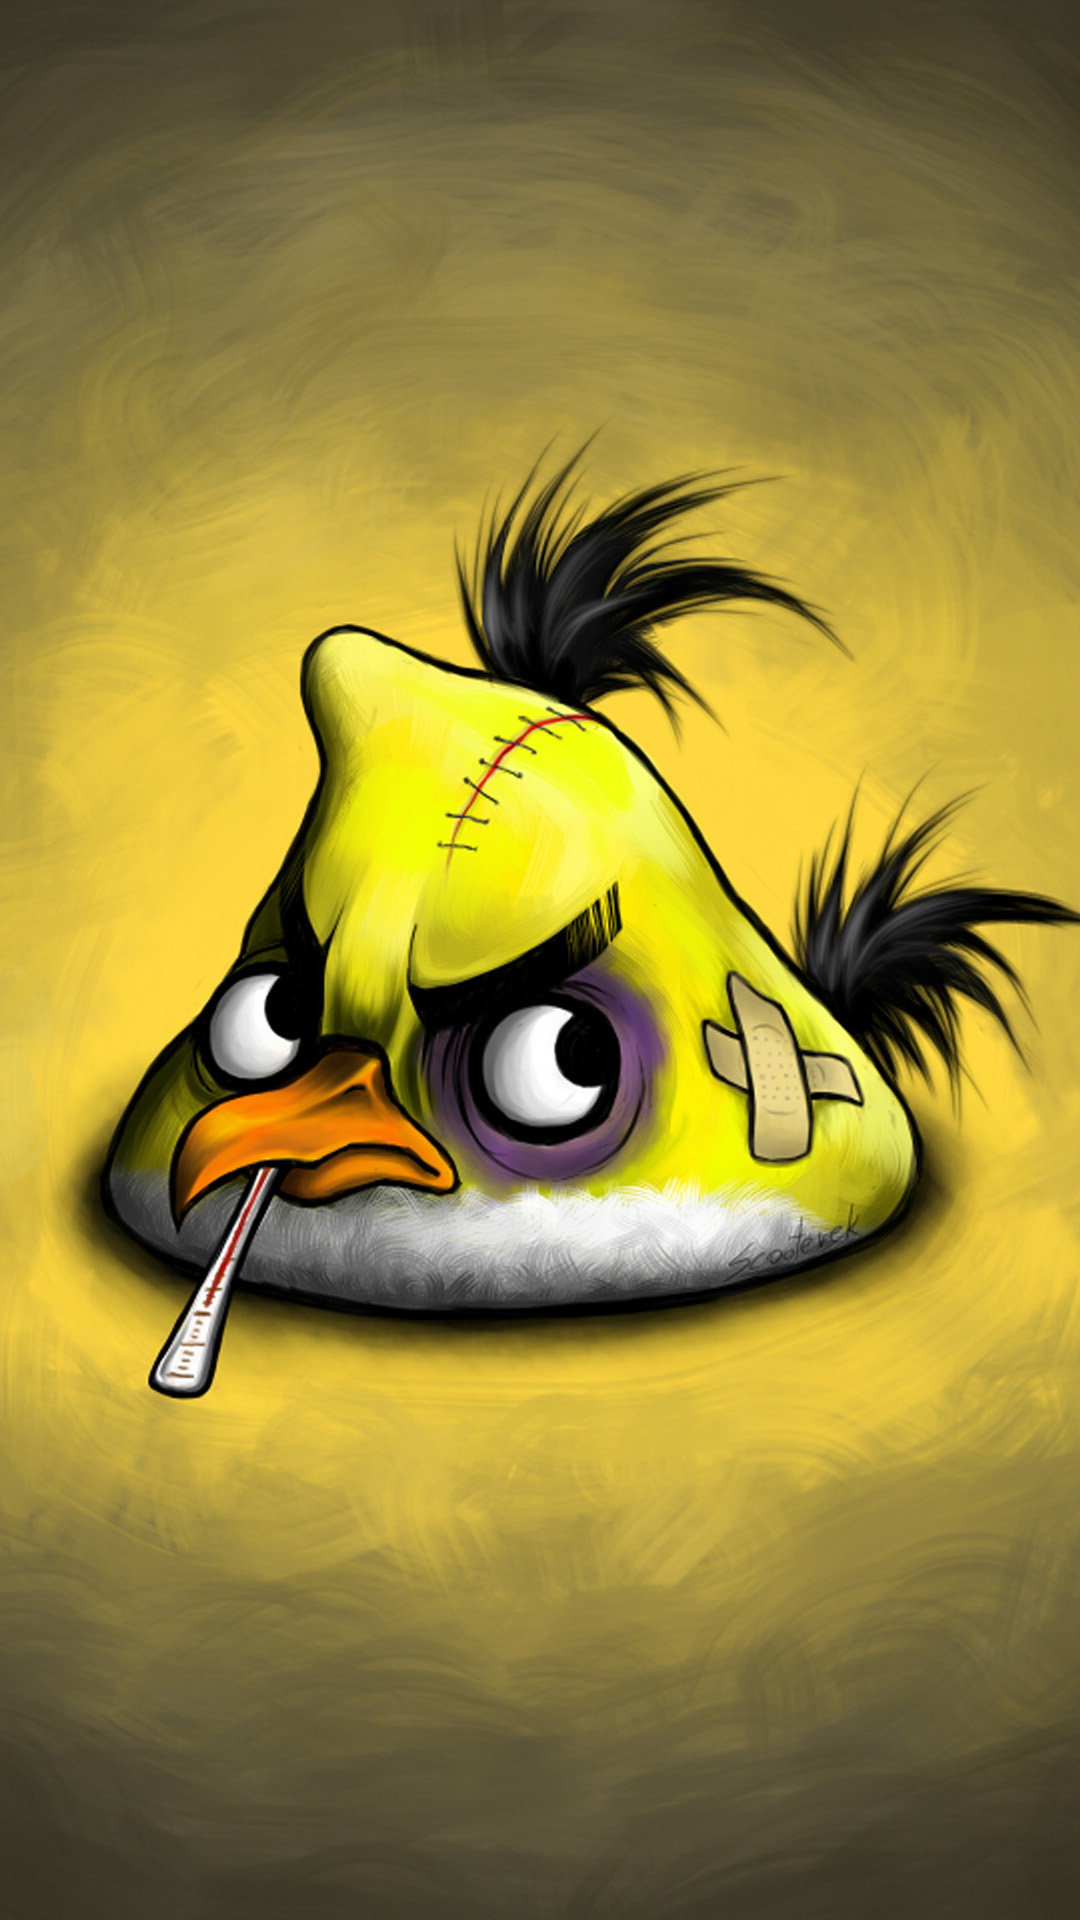 Angry Birds Hd Wallpapers For Mobile - Angry Bird Hd Wallpaper For Mobile - HD Wallpaper 